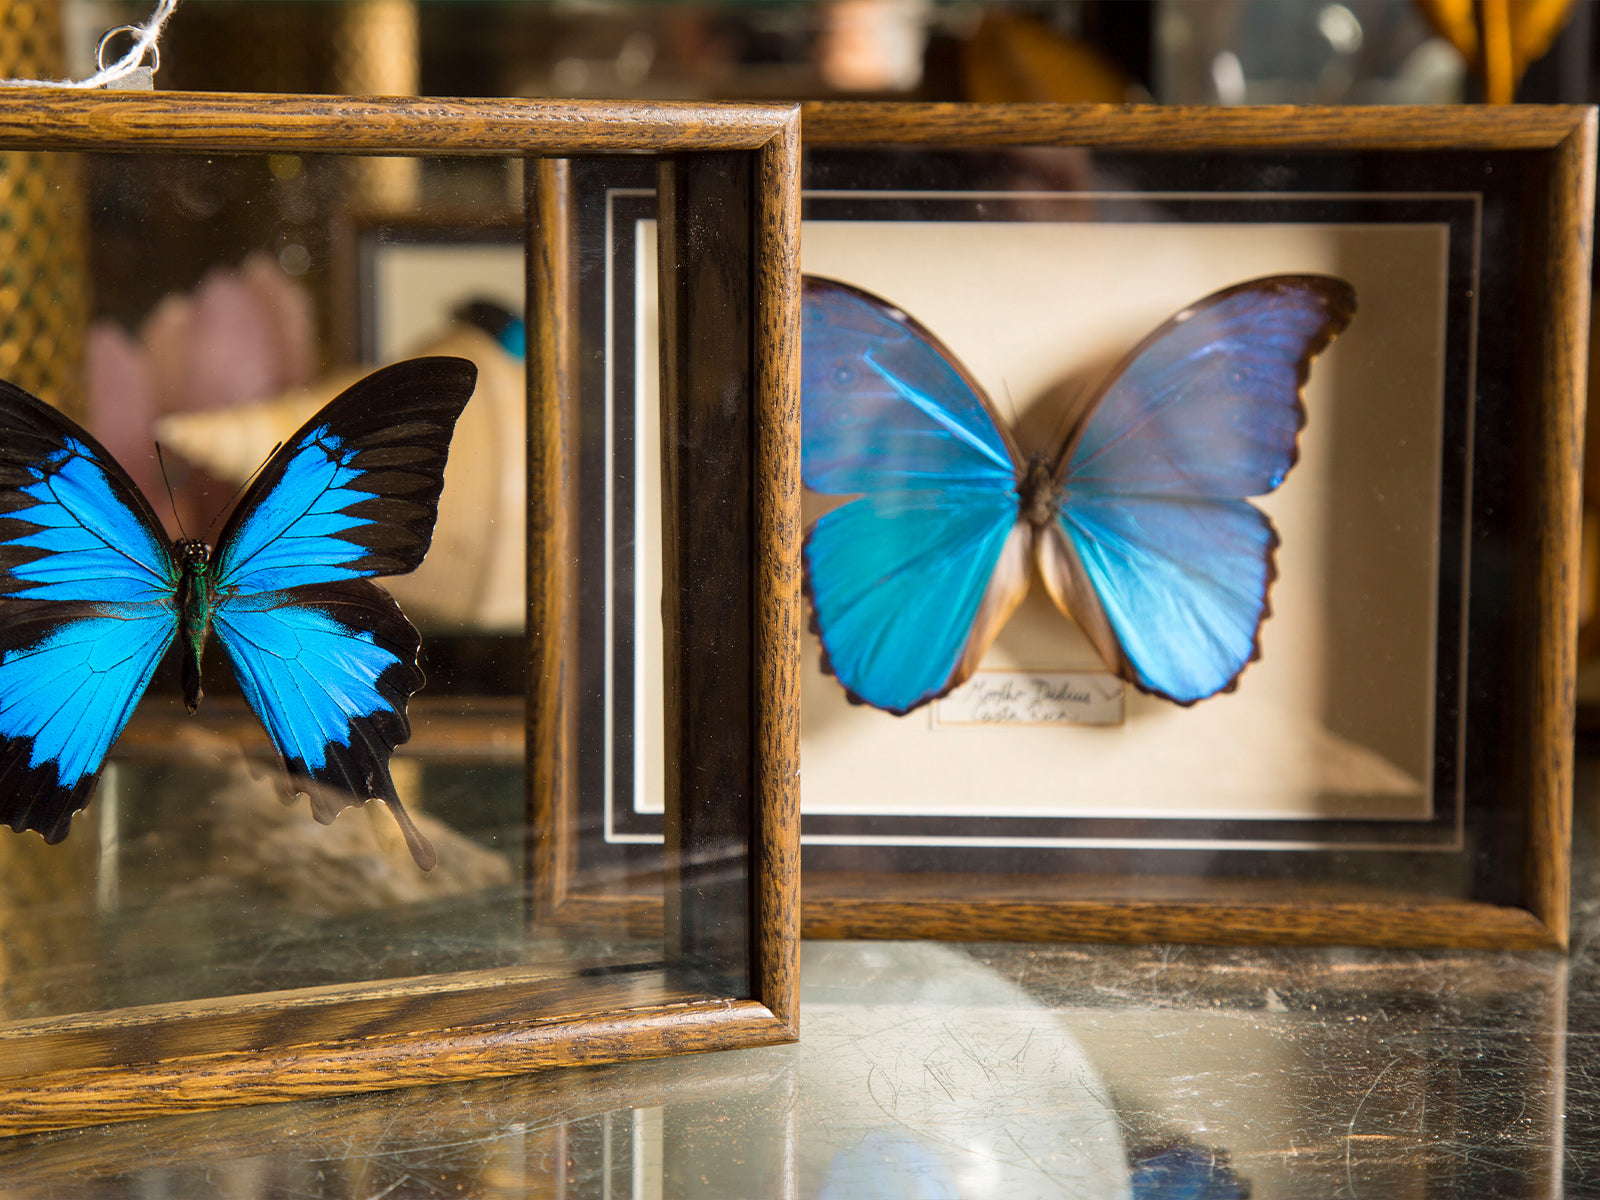 Framed Butterflies & Insects